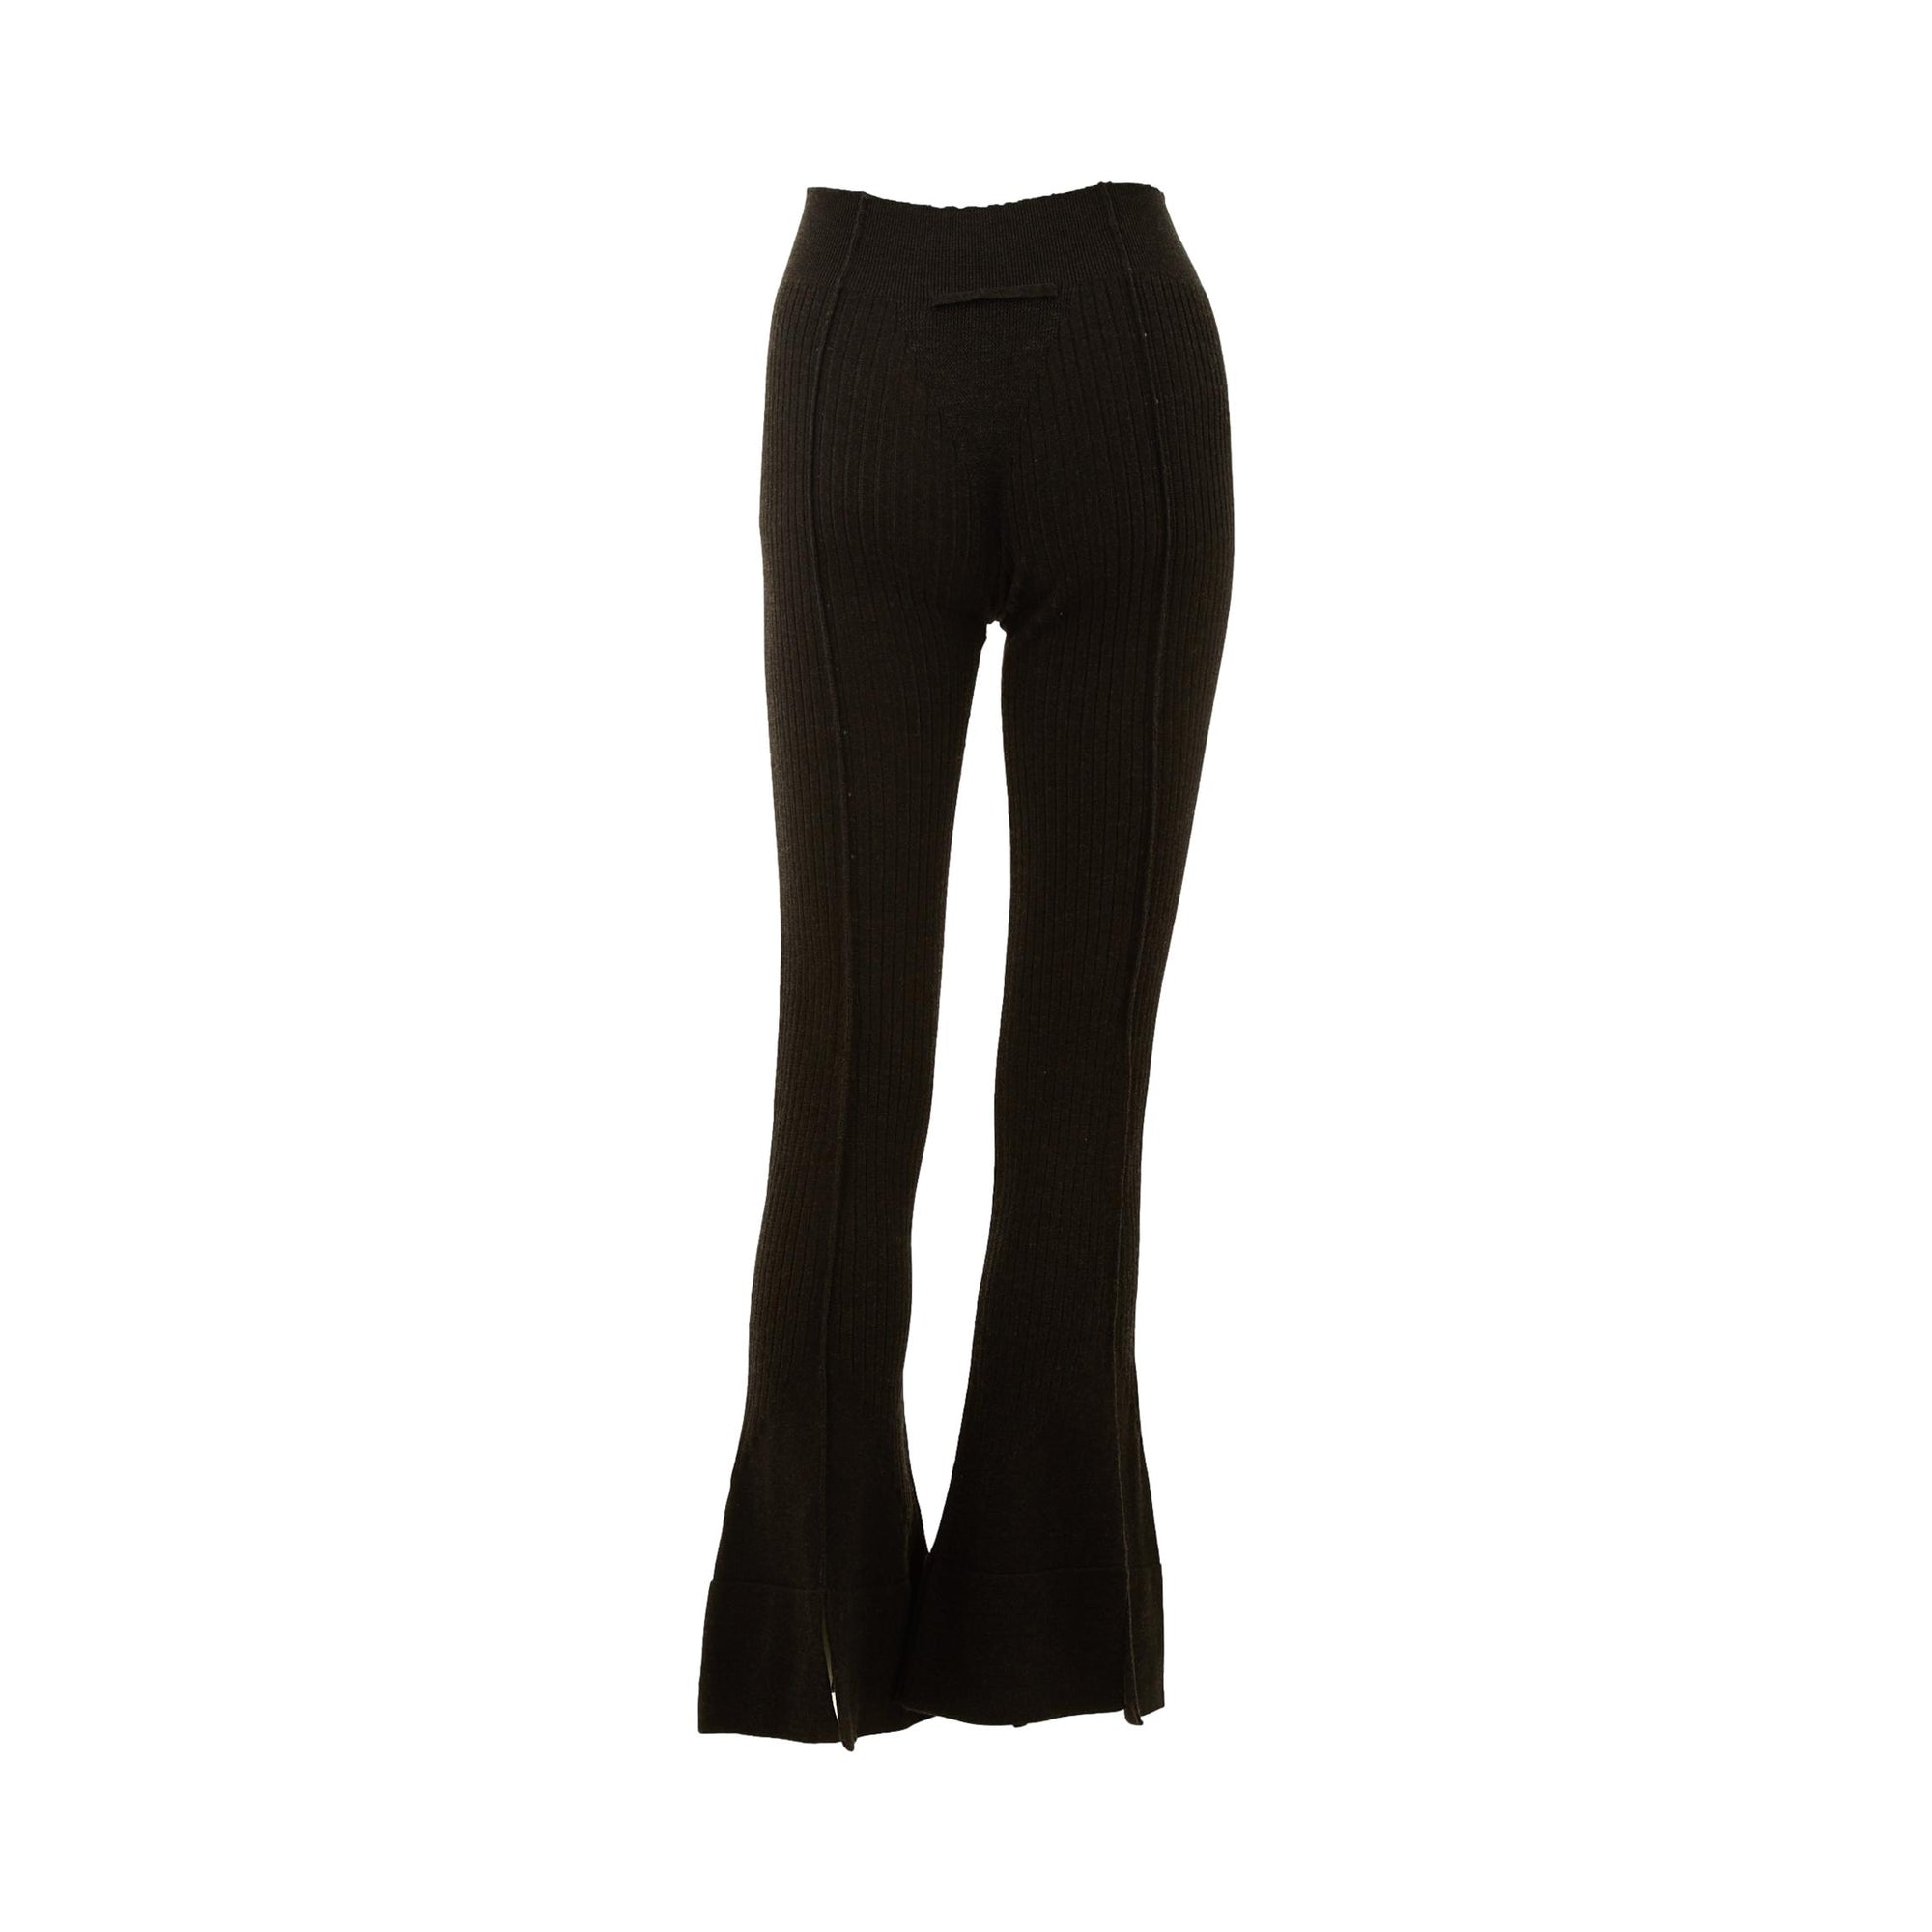 Jean Paul Gaultier Charcoal Ribbed Pants